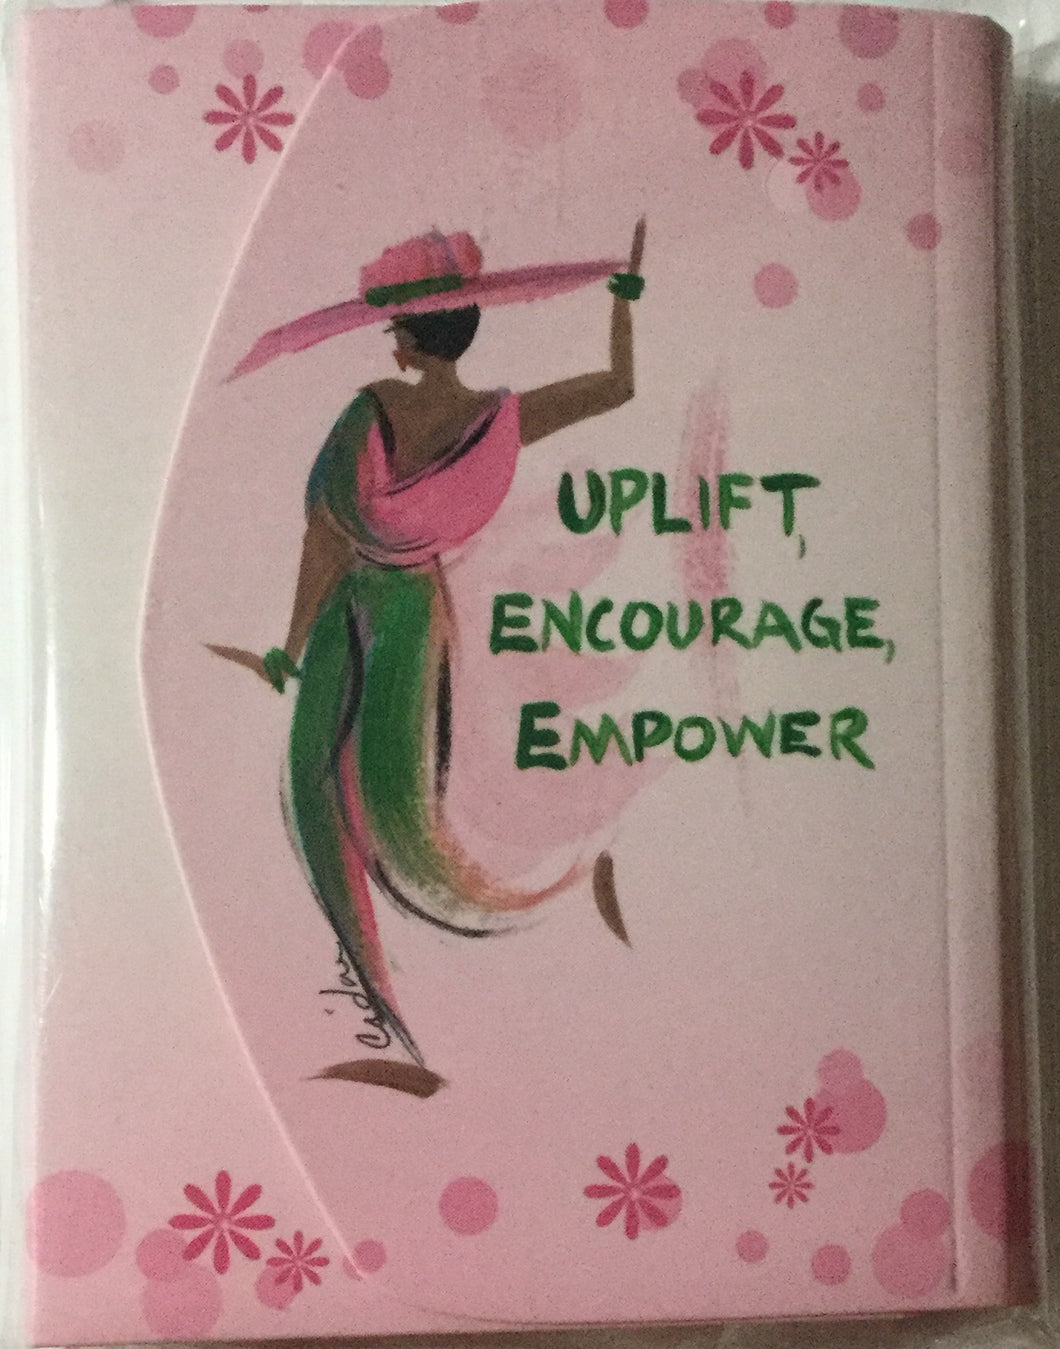 Uplift, Encourage, Empower Note Pad Purse Pal